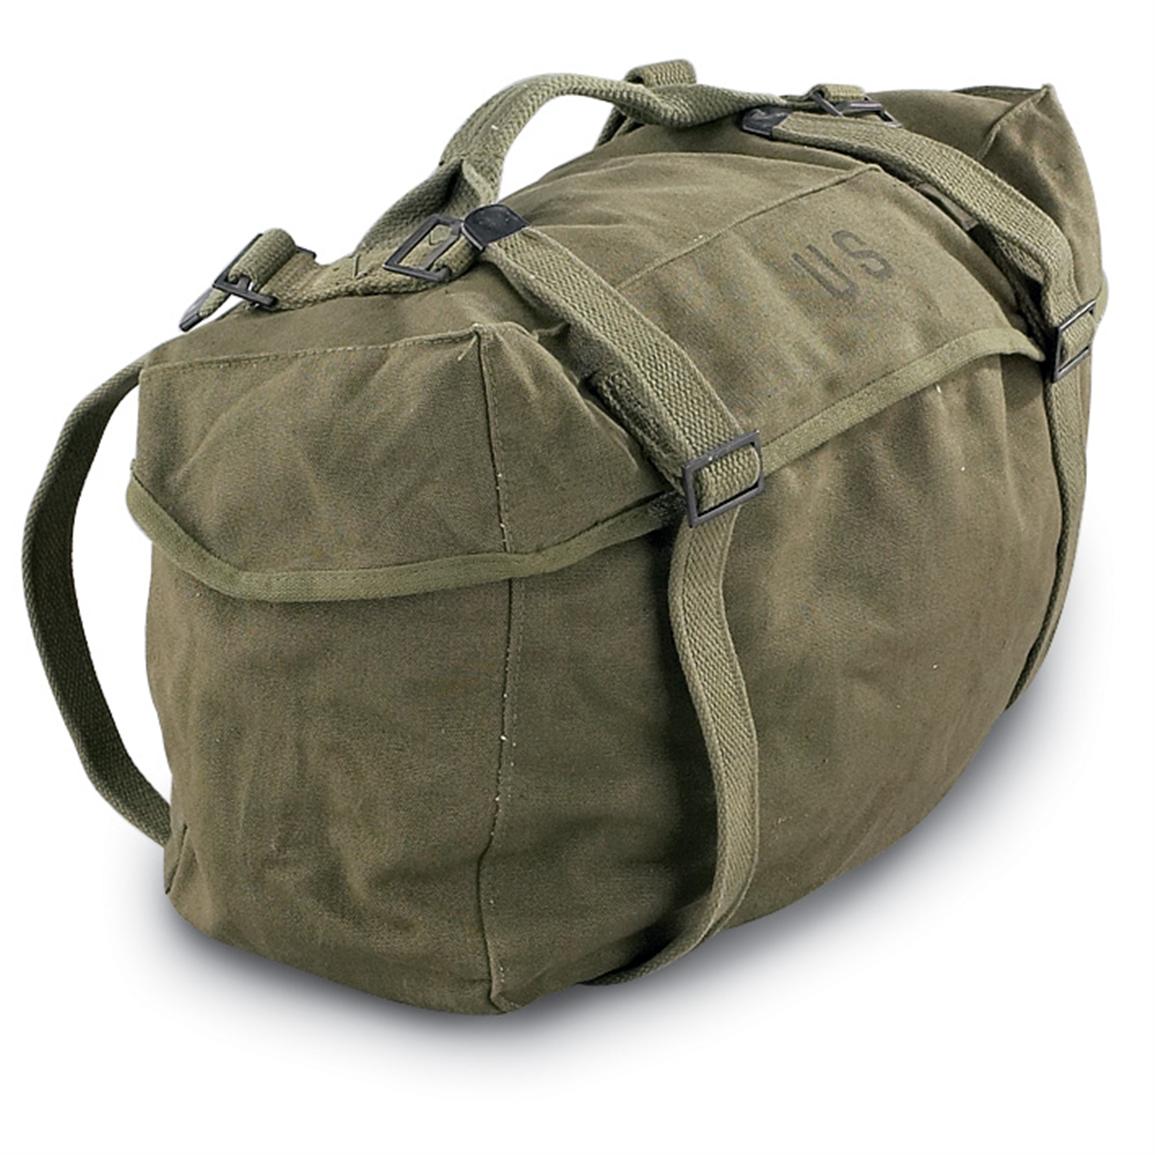 Used U.S. Mil. M1945 Cargo Bag, O.D. - 98688, at Sportsman's Guide